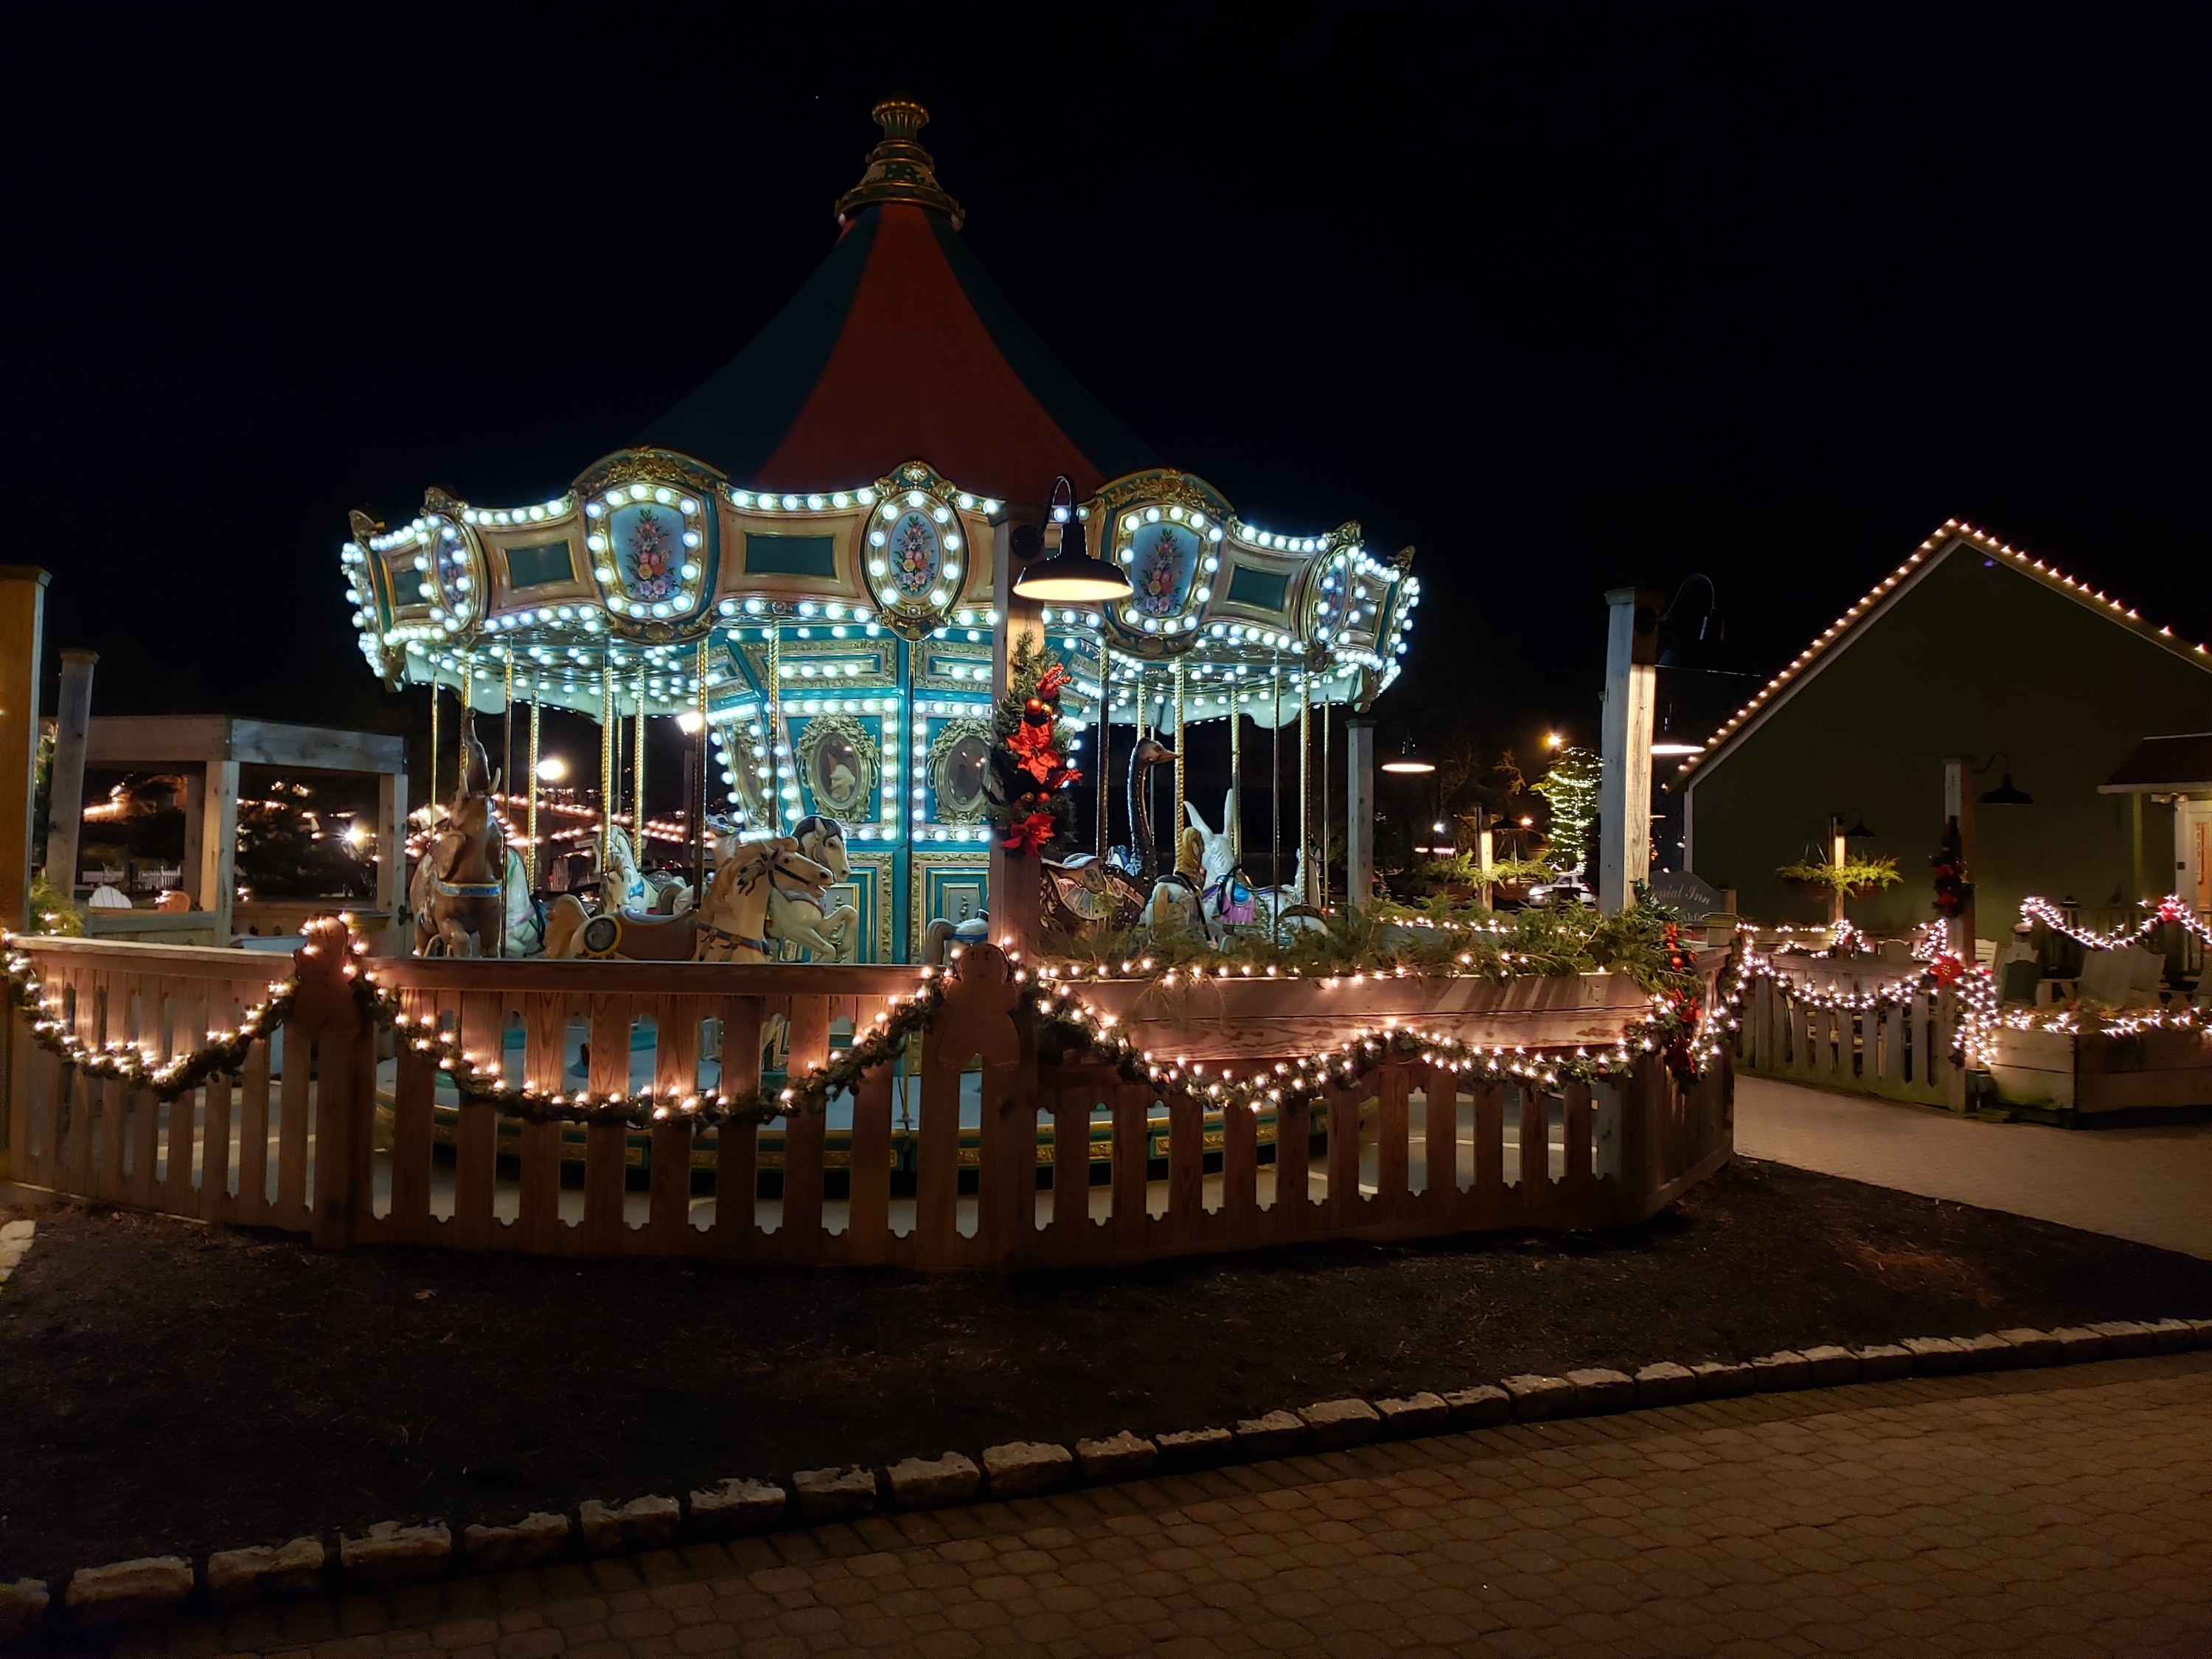 The Smithville Carousel decorated in lights at night